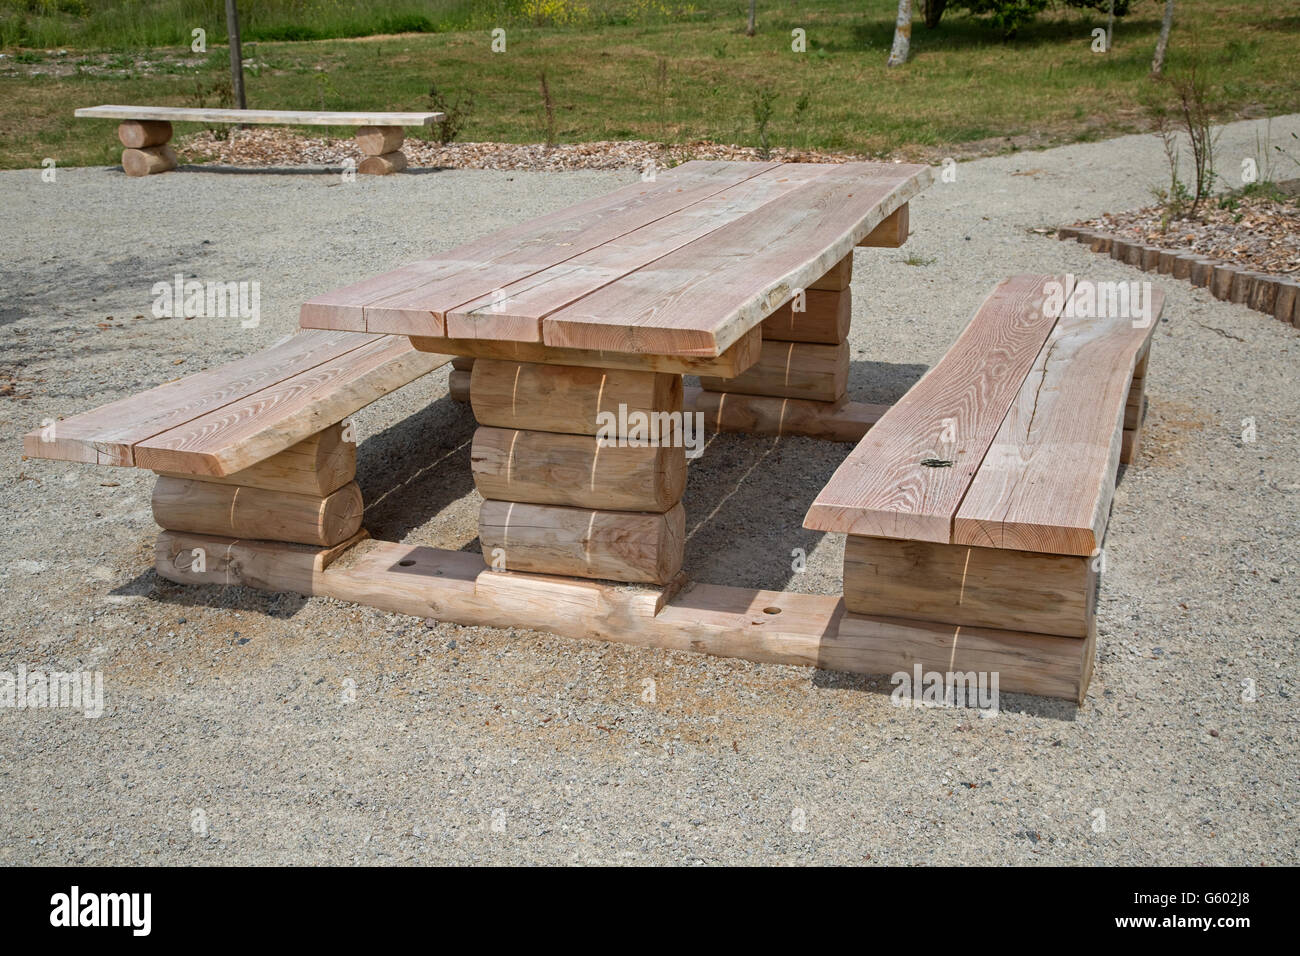 Rustic outdoor log picnic table bench seats with no people Vendee near Bouin France Stock Photo